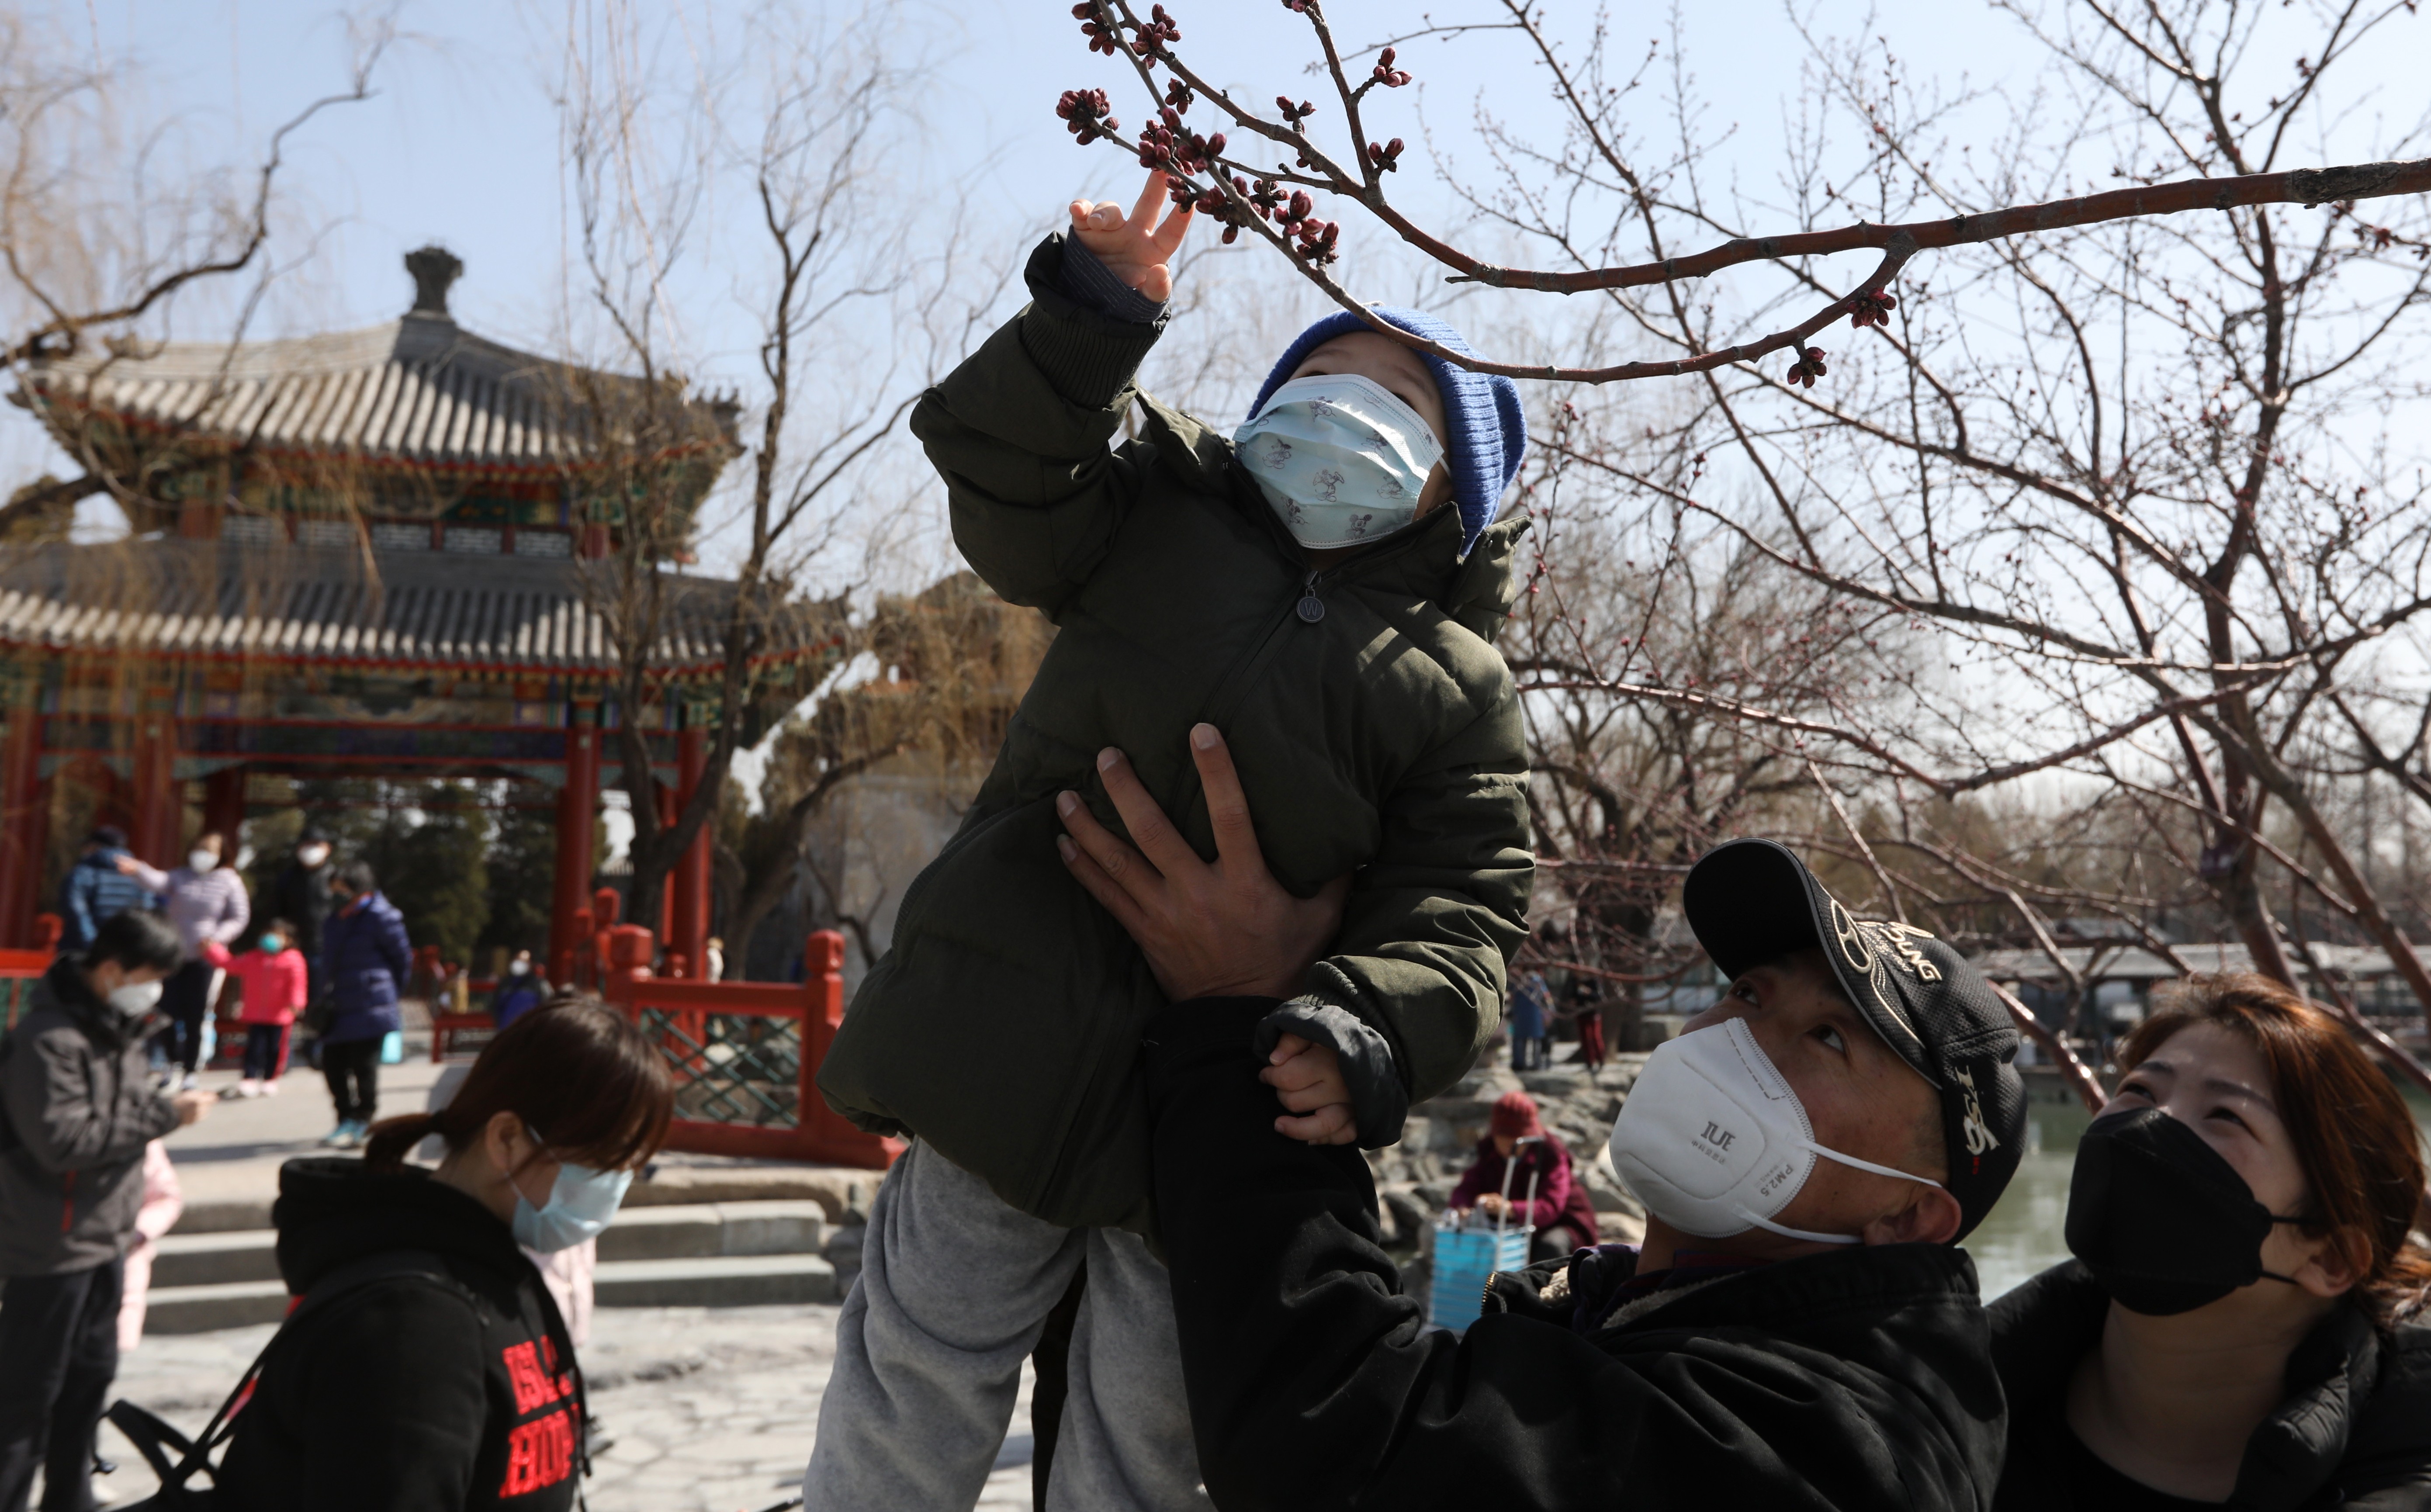 A boy reaches for the spring flower buds at the Summer Palace in Beijing, on March 11, as tourist attractions reopen in China. We now know that Covid-19, while serious, is nowhere near as bad as Sars, Mers or Ebola. Photo: Simon Song